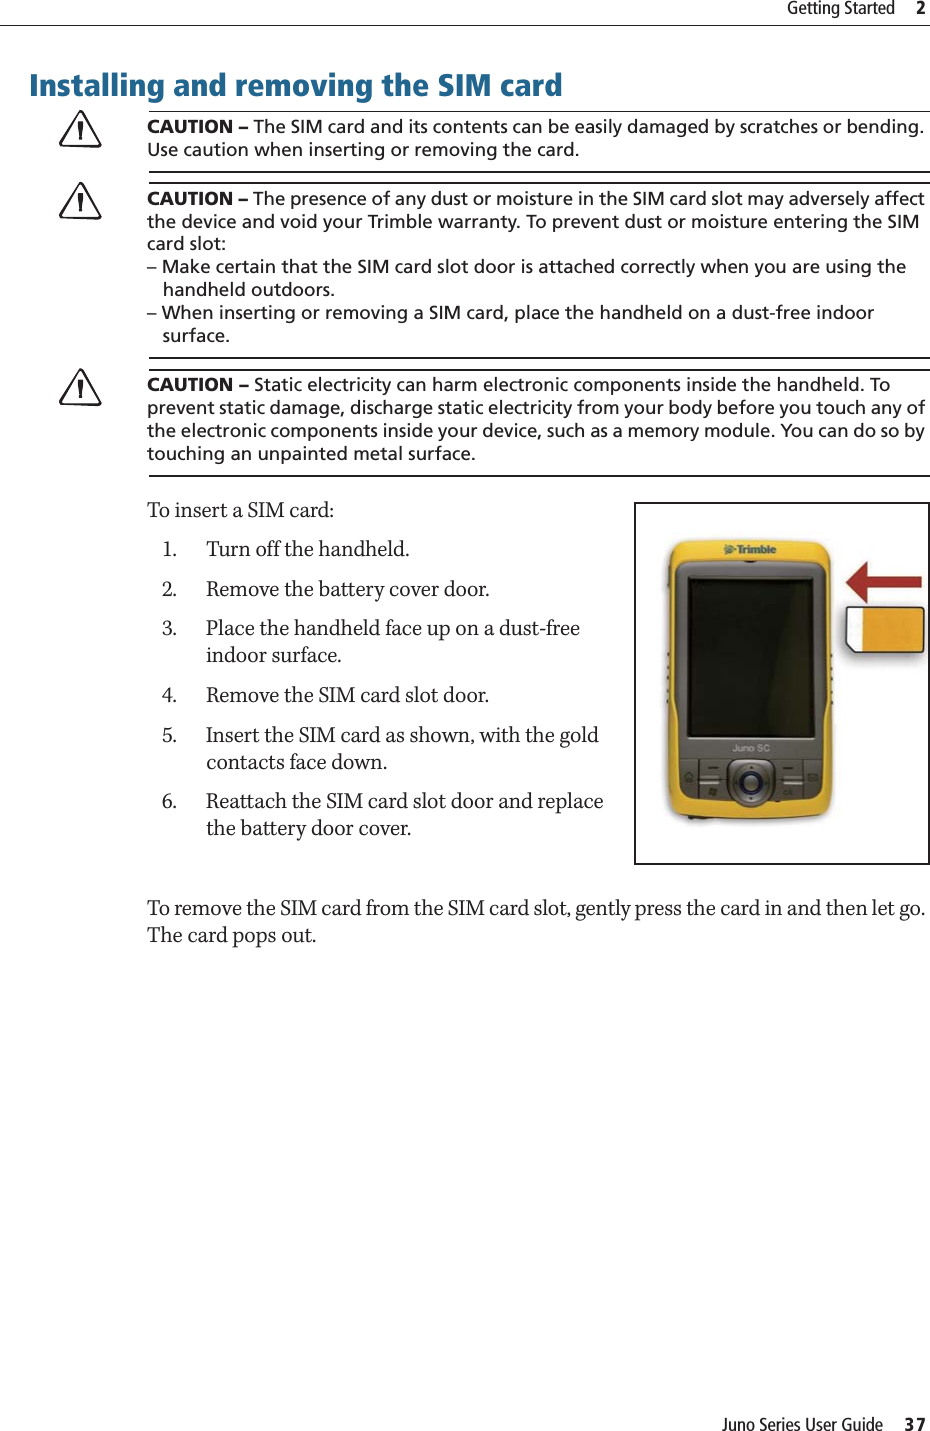 Juno Series User Guide     37Getting Started     2Installing and removing the SIM cardCCAUTION – The SIM card and its contents can be easily damaged by scratches or bending. Use caution when inserting or removing the card. CCAUTION – The presence of any dust or moisture in the SIM card slot may adversely affect the device and void your Trimble warranty. To prevent dust or moisture entering the SIM card slot: – Make certain that the SIM card slot door is attached correctly when you are using the    handheld outdoors. – When inserting or removing a SIM card, place the handheld on a dust-free indoor    surface.CCAUTION – Static electricity can harm electronic components inside the handheld. To prevent static damage, discharge static electricity from your body before you touch any of the electronic components inside your device, such as a memory module. You can do so by touching an unpainted metal surface.To insert a SIM card:1. Turn off the handheld.2. Remove the battery cover door.3. Place the handheld face up on a dust-free indoor surface.4. Remove the SIM card slot door.5. Insert the SIM card as shown, with the gold contacts face down.6. Reattach the SIM card slot door and replace the battery door cover.To remove the SIM card from the SIM card slot, gently press the card in and then let go. The card pops out.